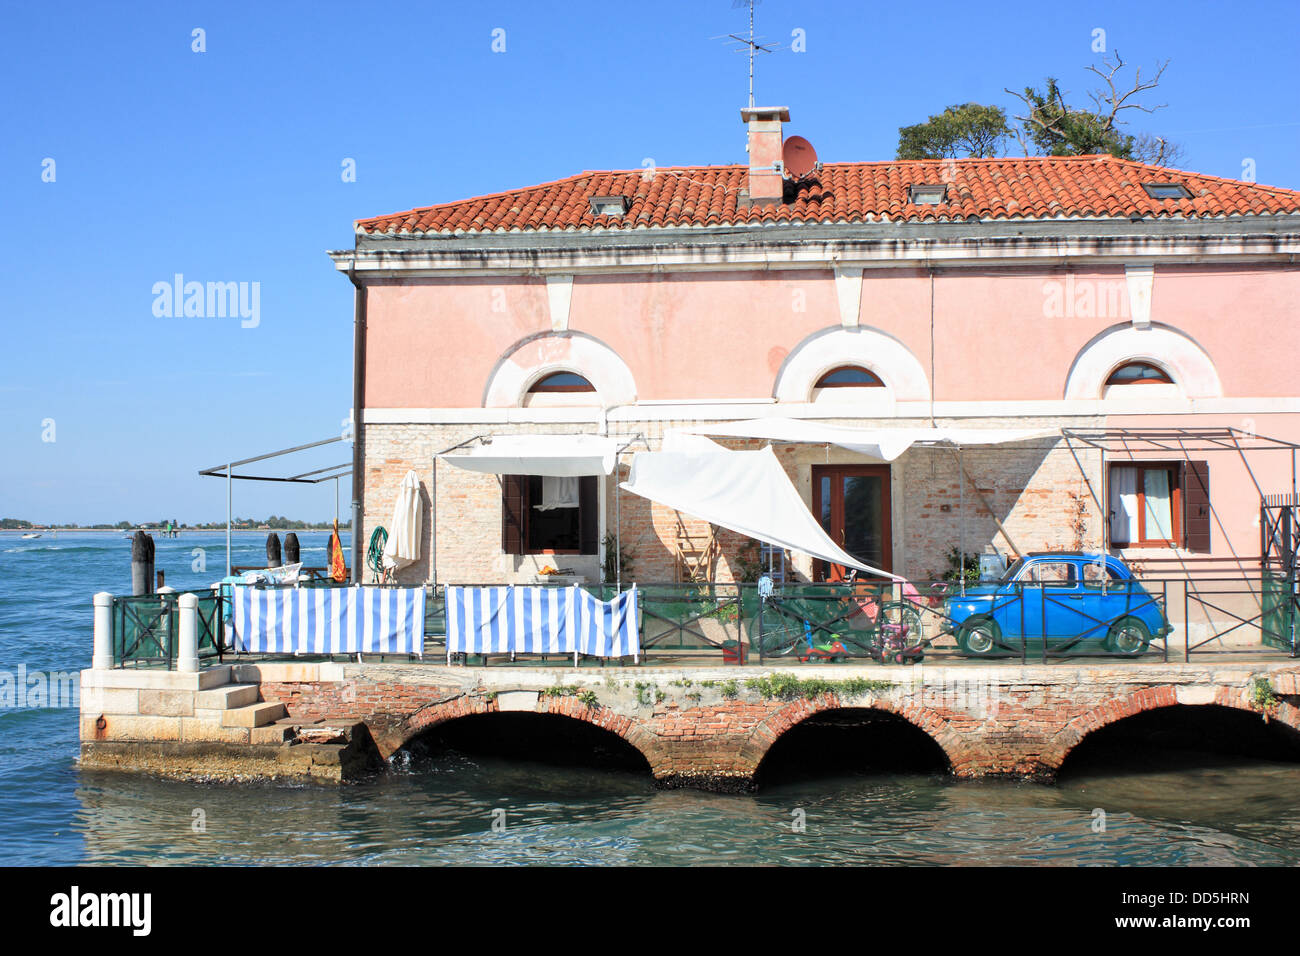 On water build house at the lagoon side of Lido island with an old fiat 500 car parking at the terrace, Venice, Italy Stock Photo